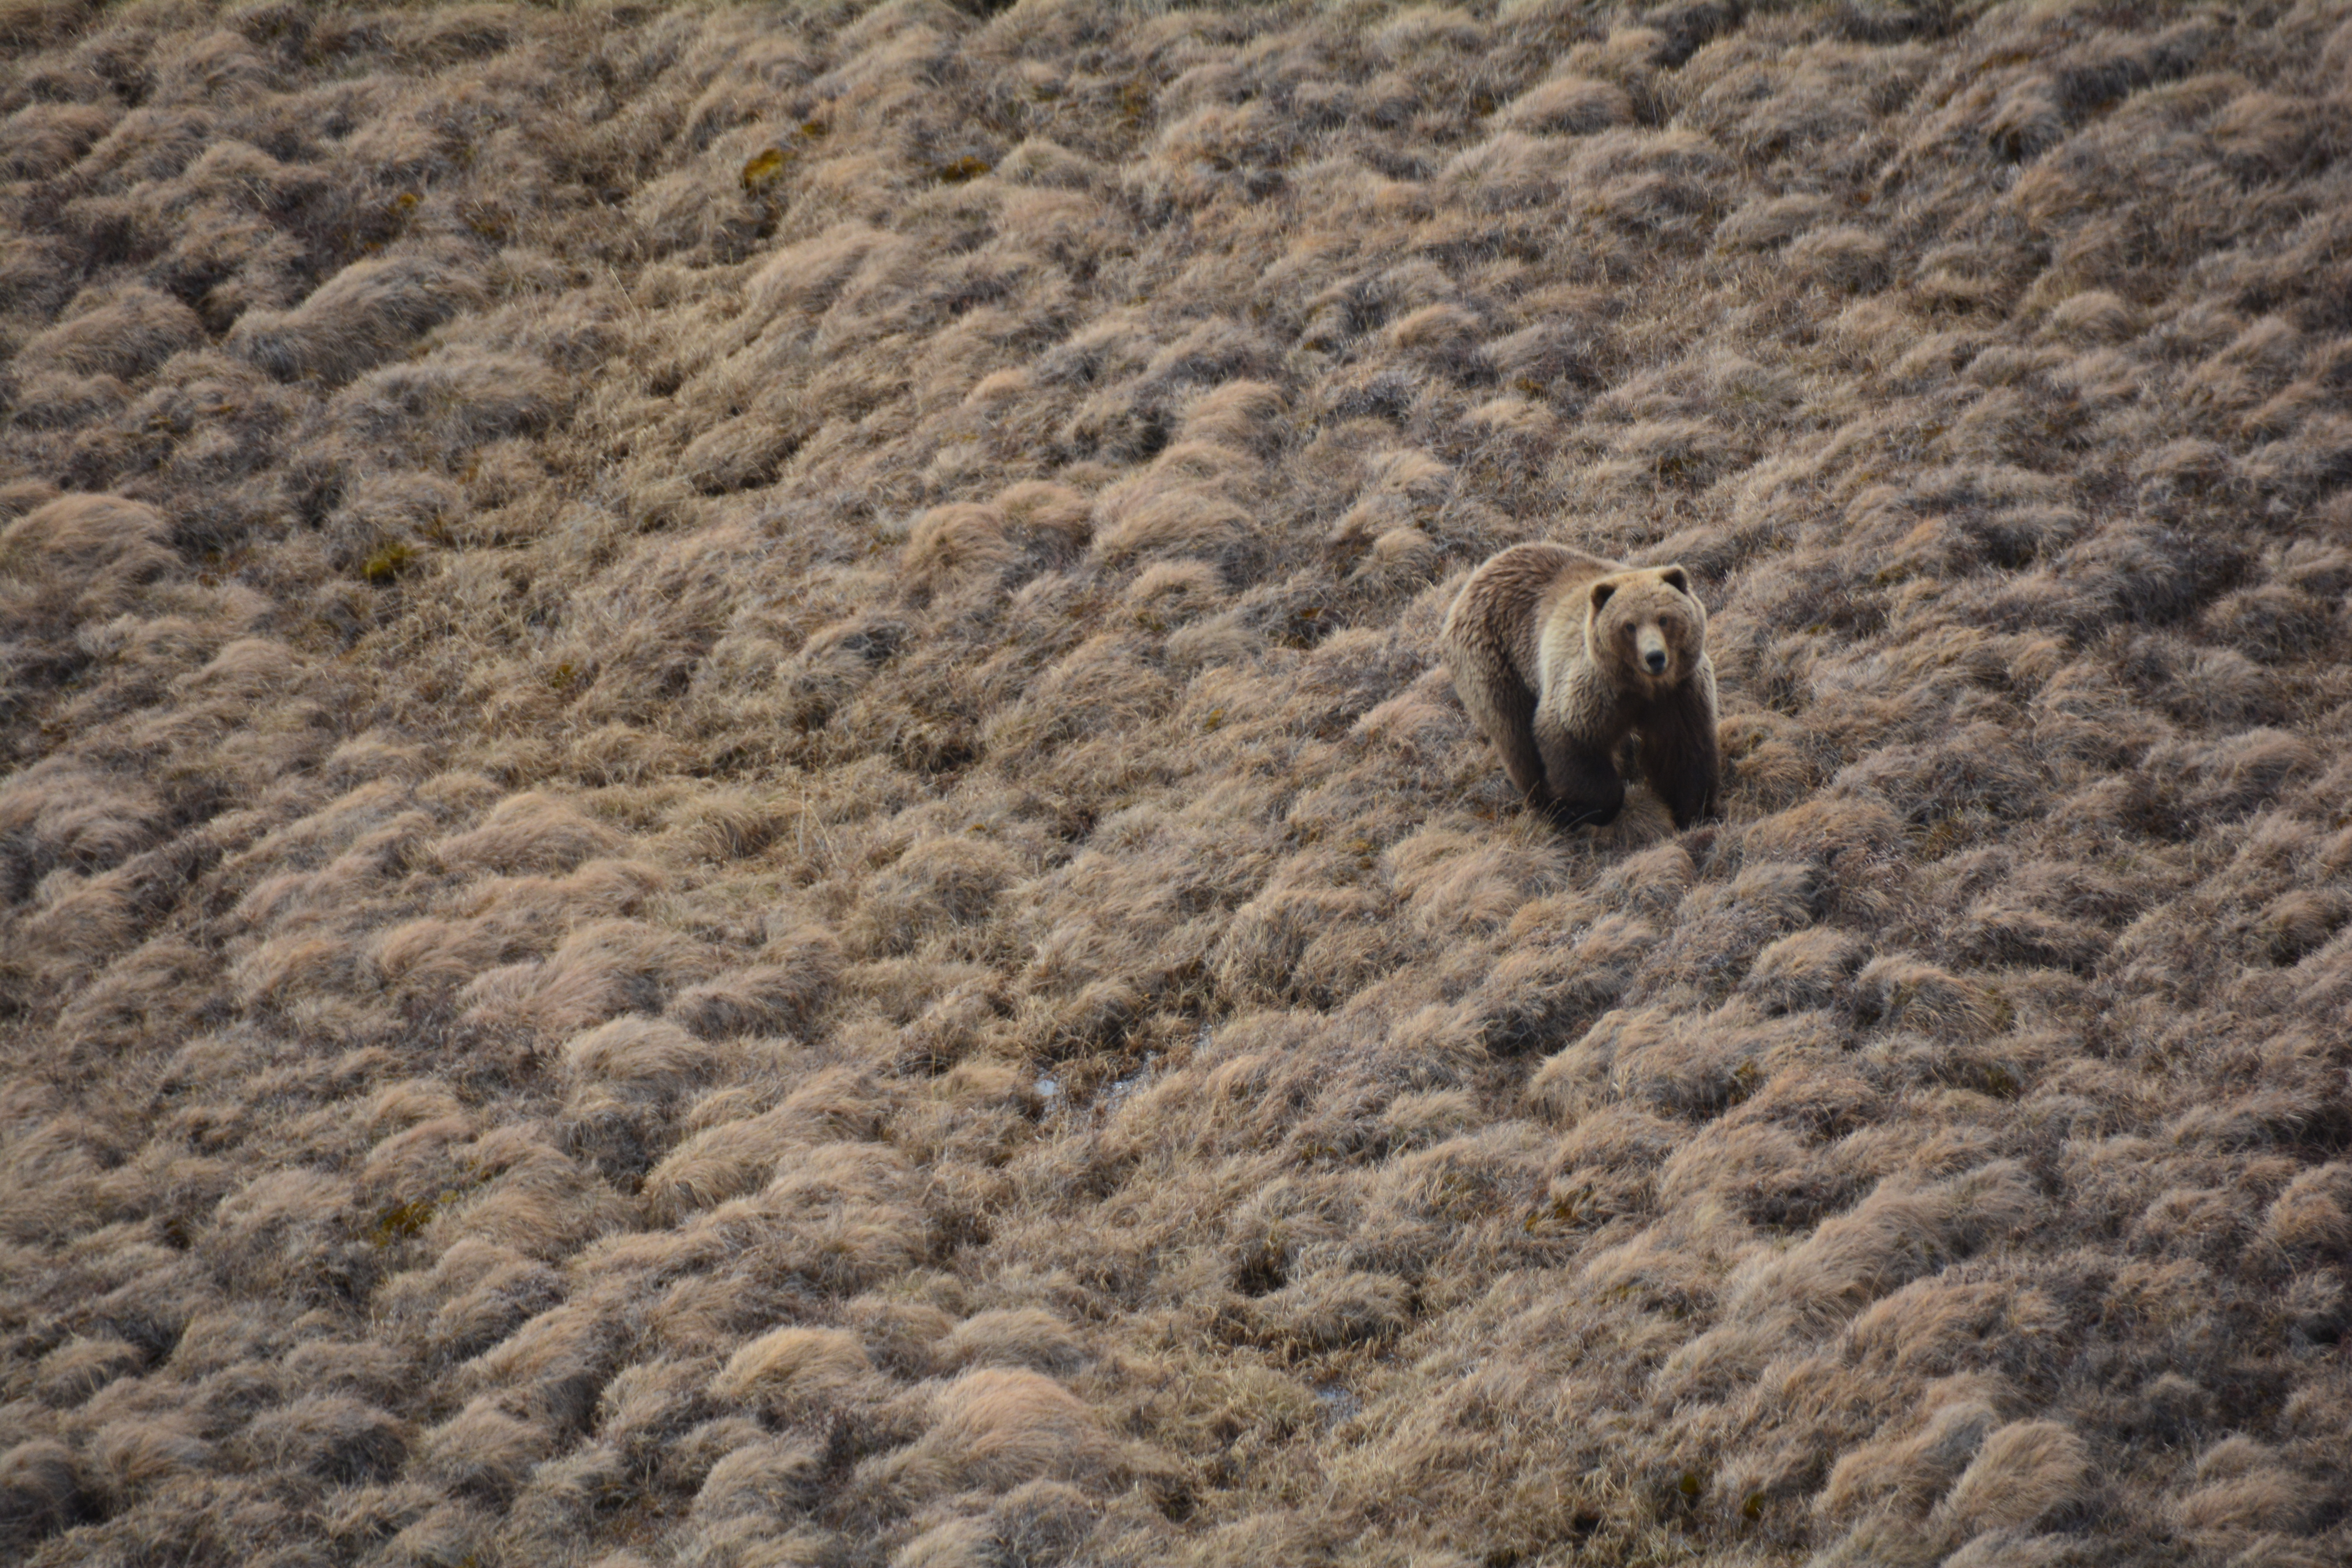 A large brown bear, whose light brown fur is the same color as the surrounding scrubby tundra, looks up at the camera.